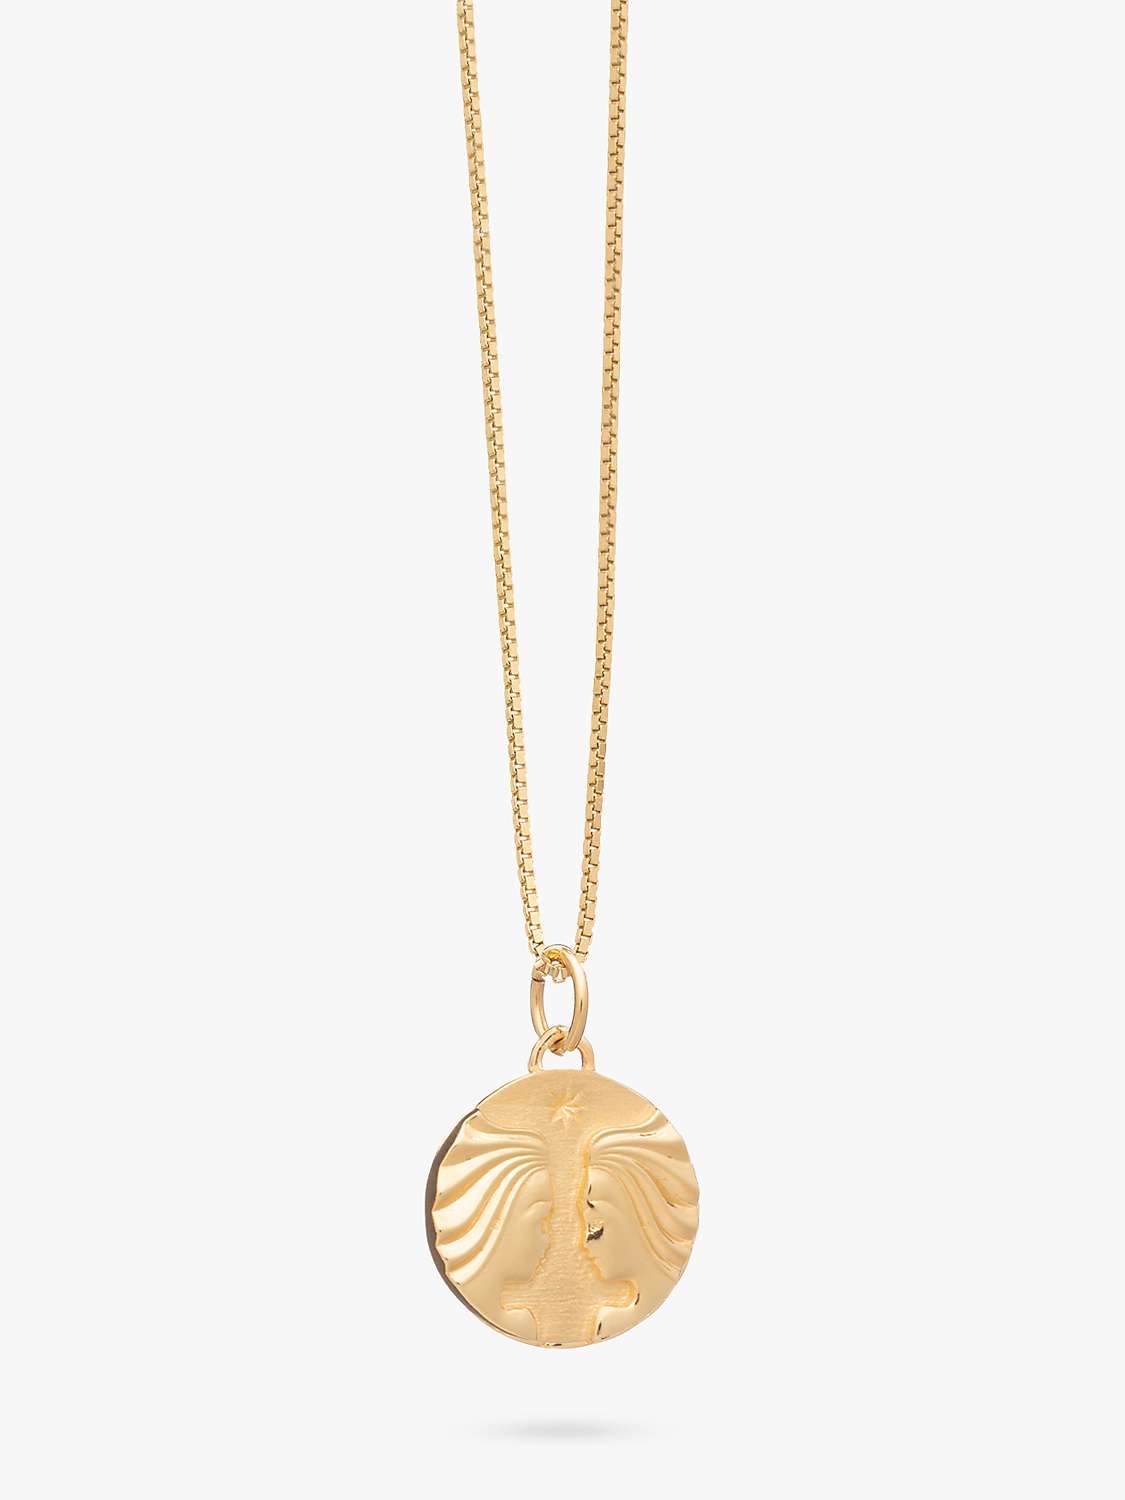 Buy Rachel Jackson London Personalised Zodiac Art Coin Necklace, Gold Online at johnlewis.com